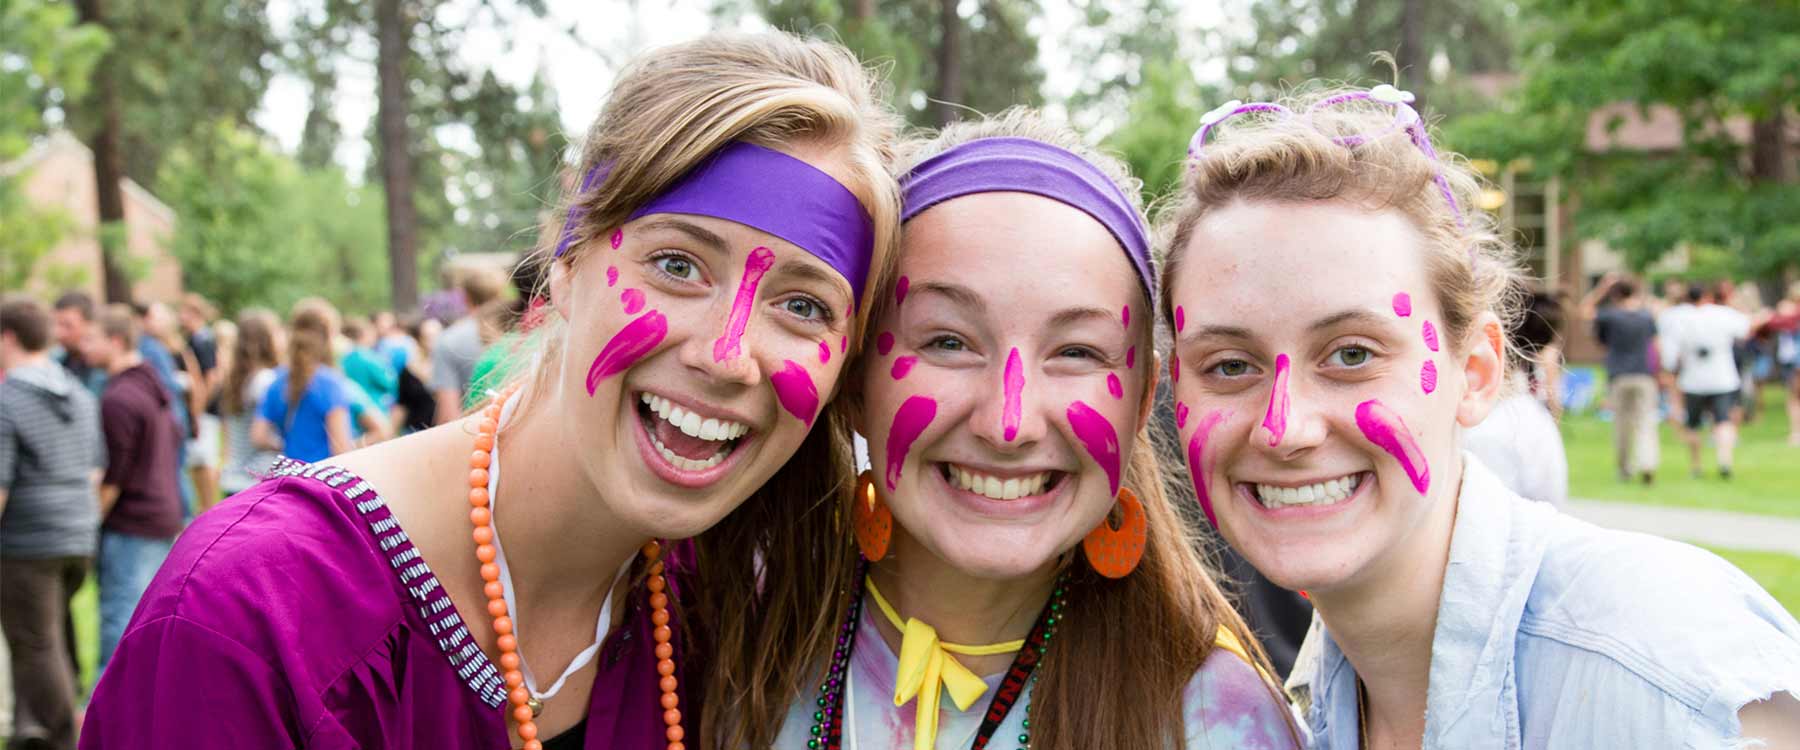 Three students, with headbands and bright face paint, stand close together and smile.